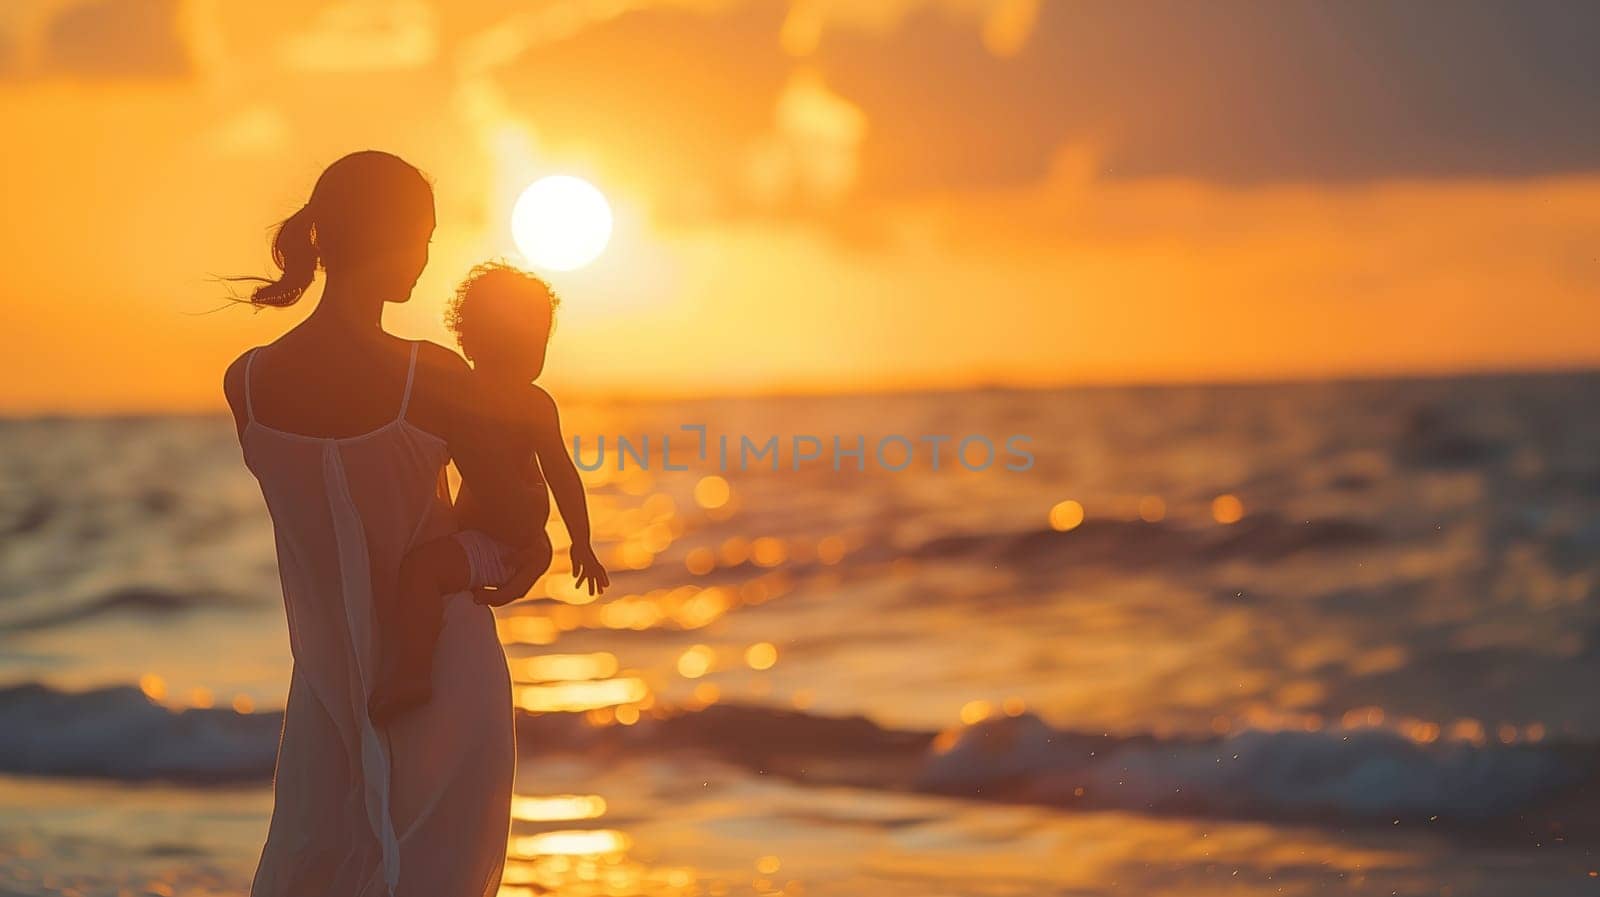 A woman is standing on the beach at sunset, holding a baby in her arms. The golden light of the setting sun casts a warm glow over the scene as they enjoy a moment together by the ocean.